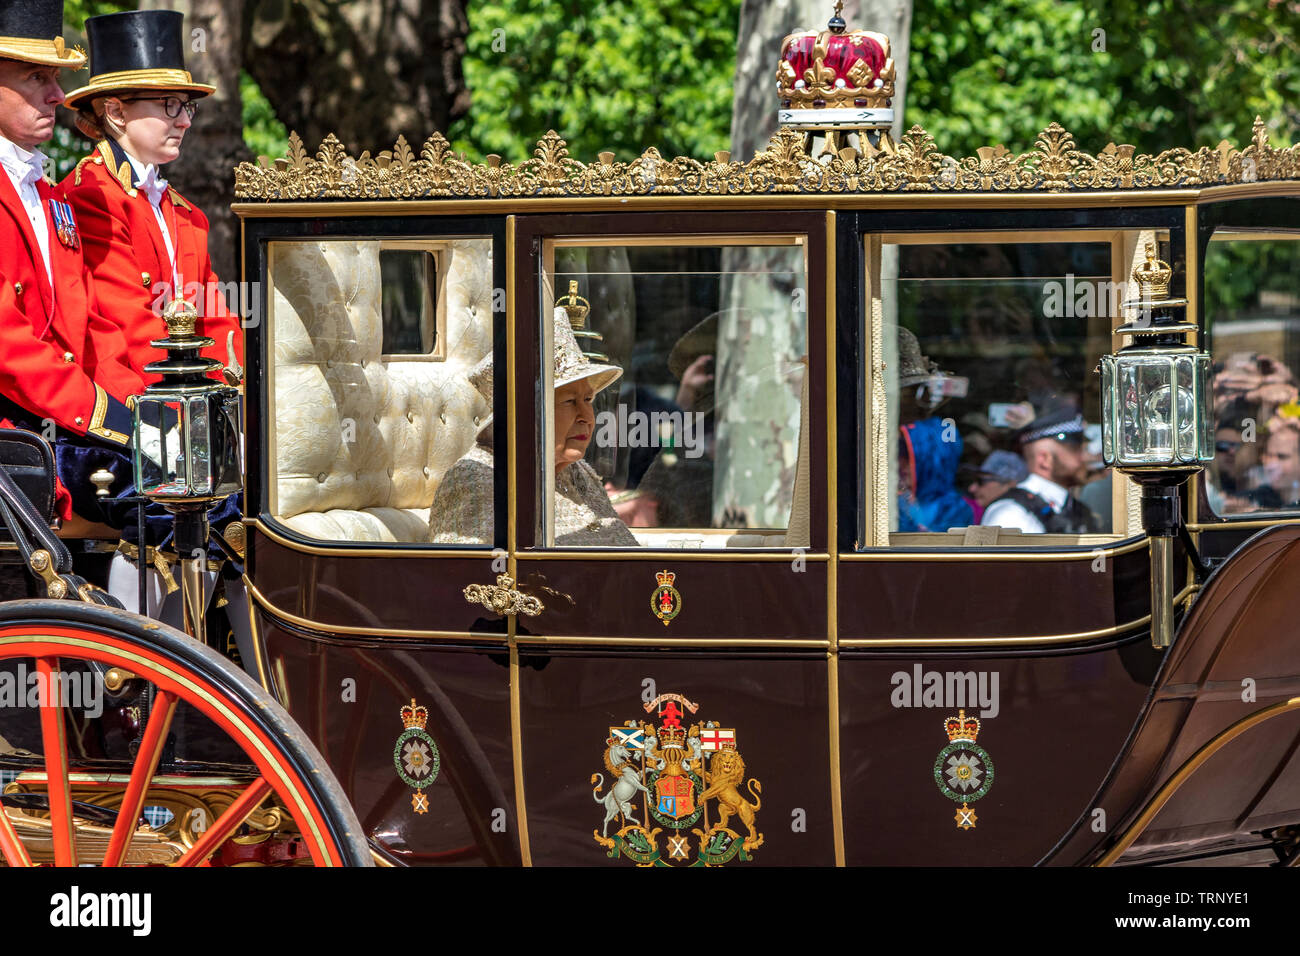 Her Majesty The Queen wearing an Angela Kelly tweed outfit riding in The Scottish State Coach along The Mall at The Trooping The Colour ceremony ,2019 Stock Photo